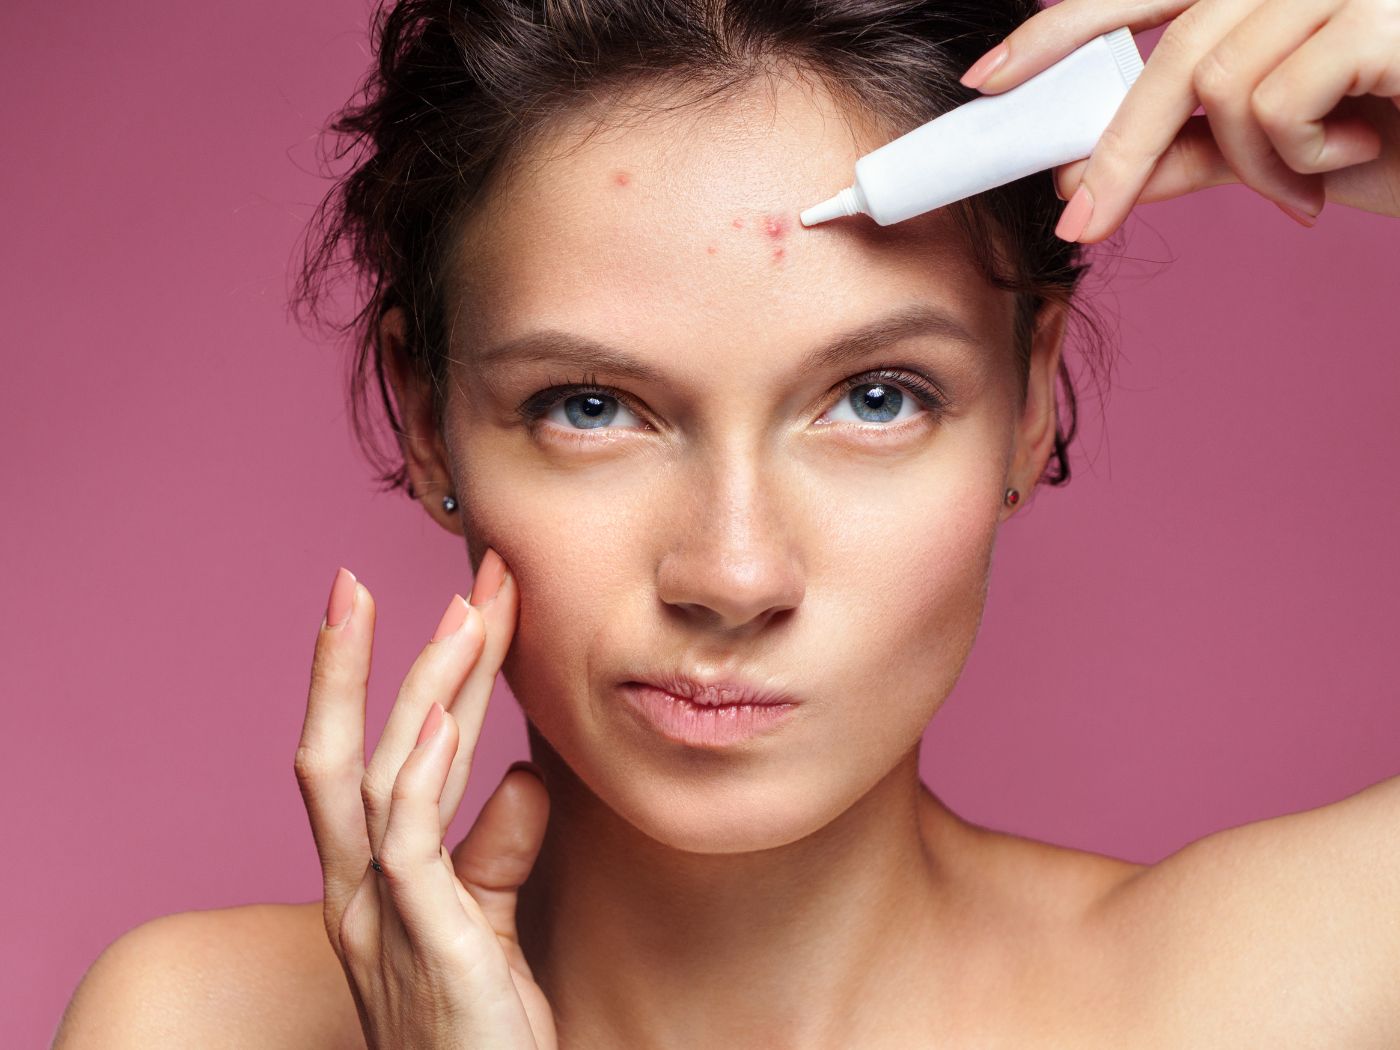 Sweat Pimples On The Forehead - Causes & Prevention